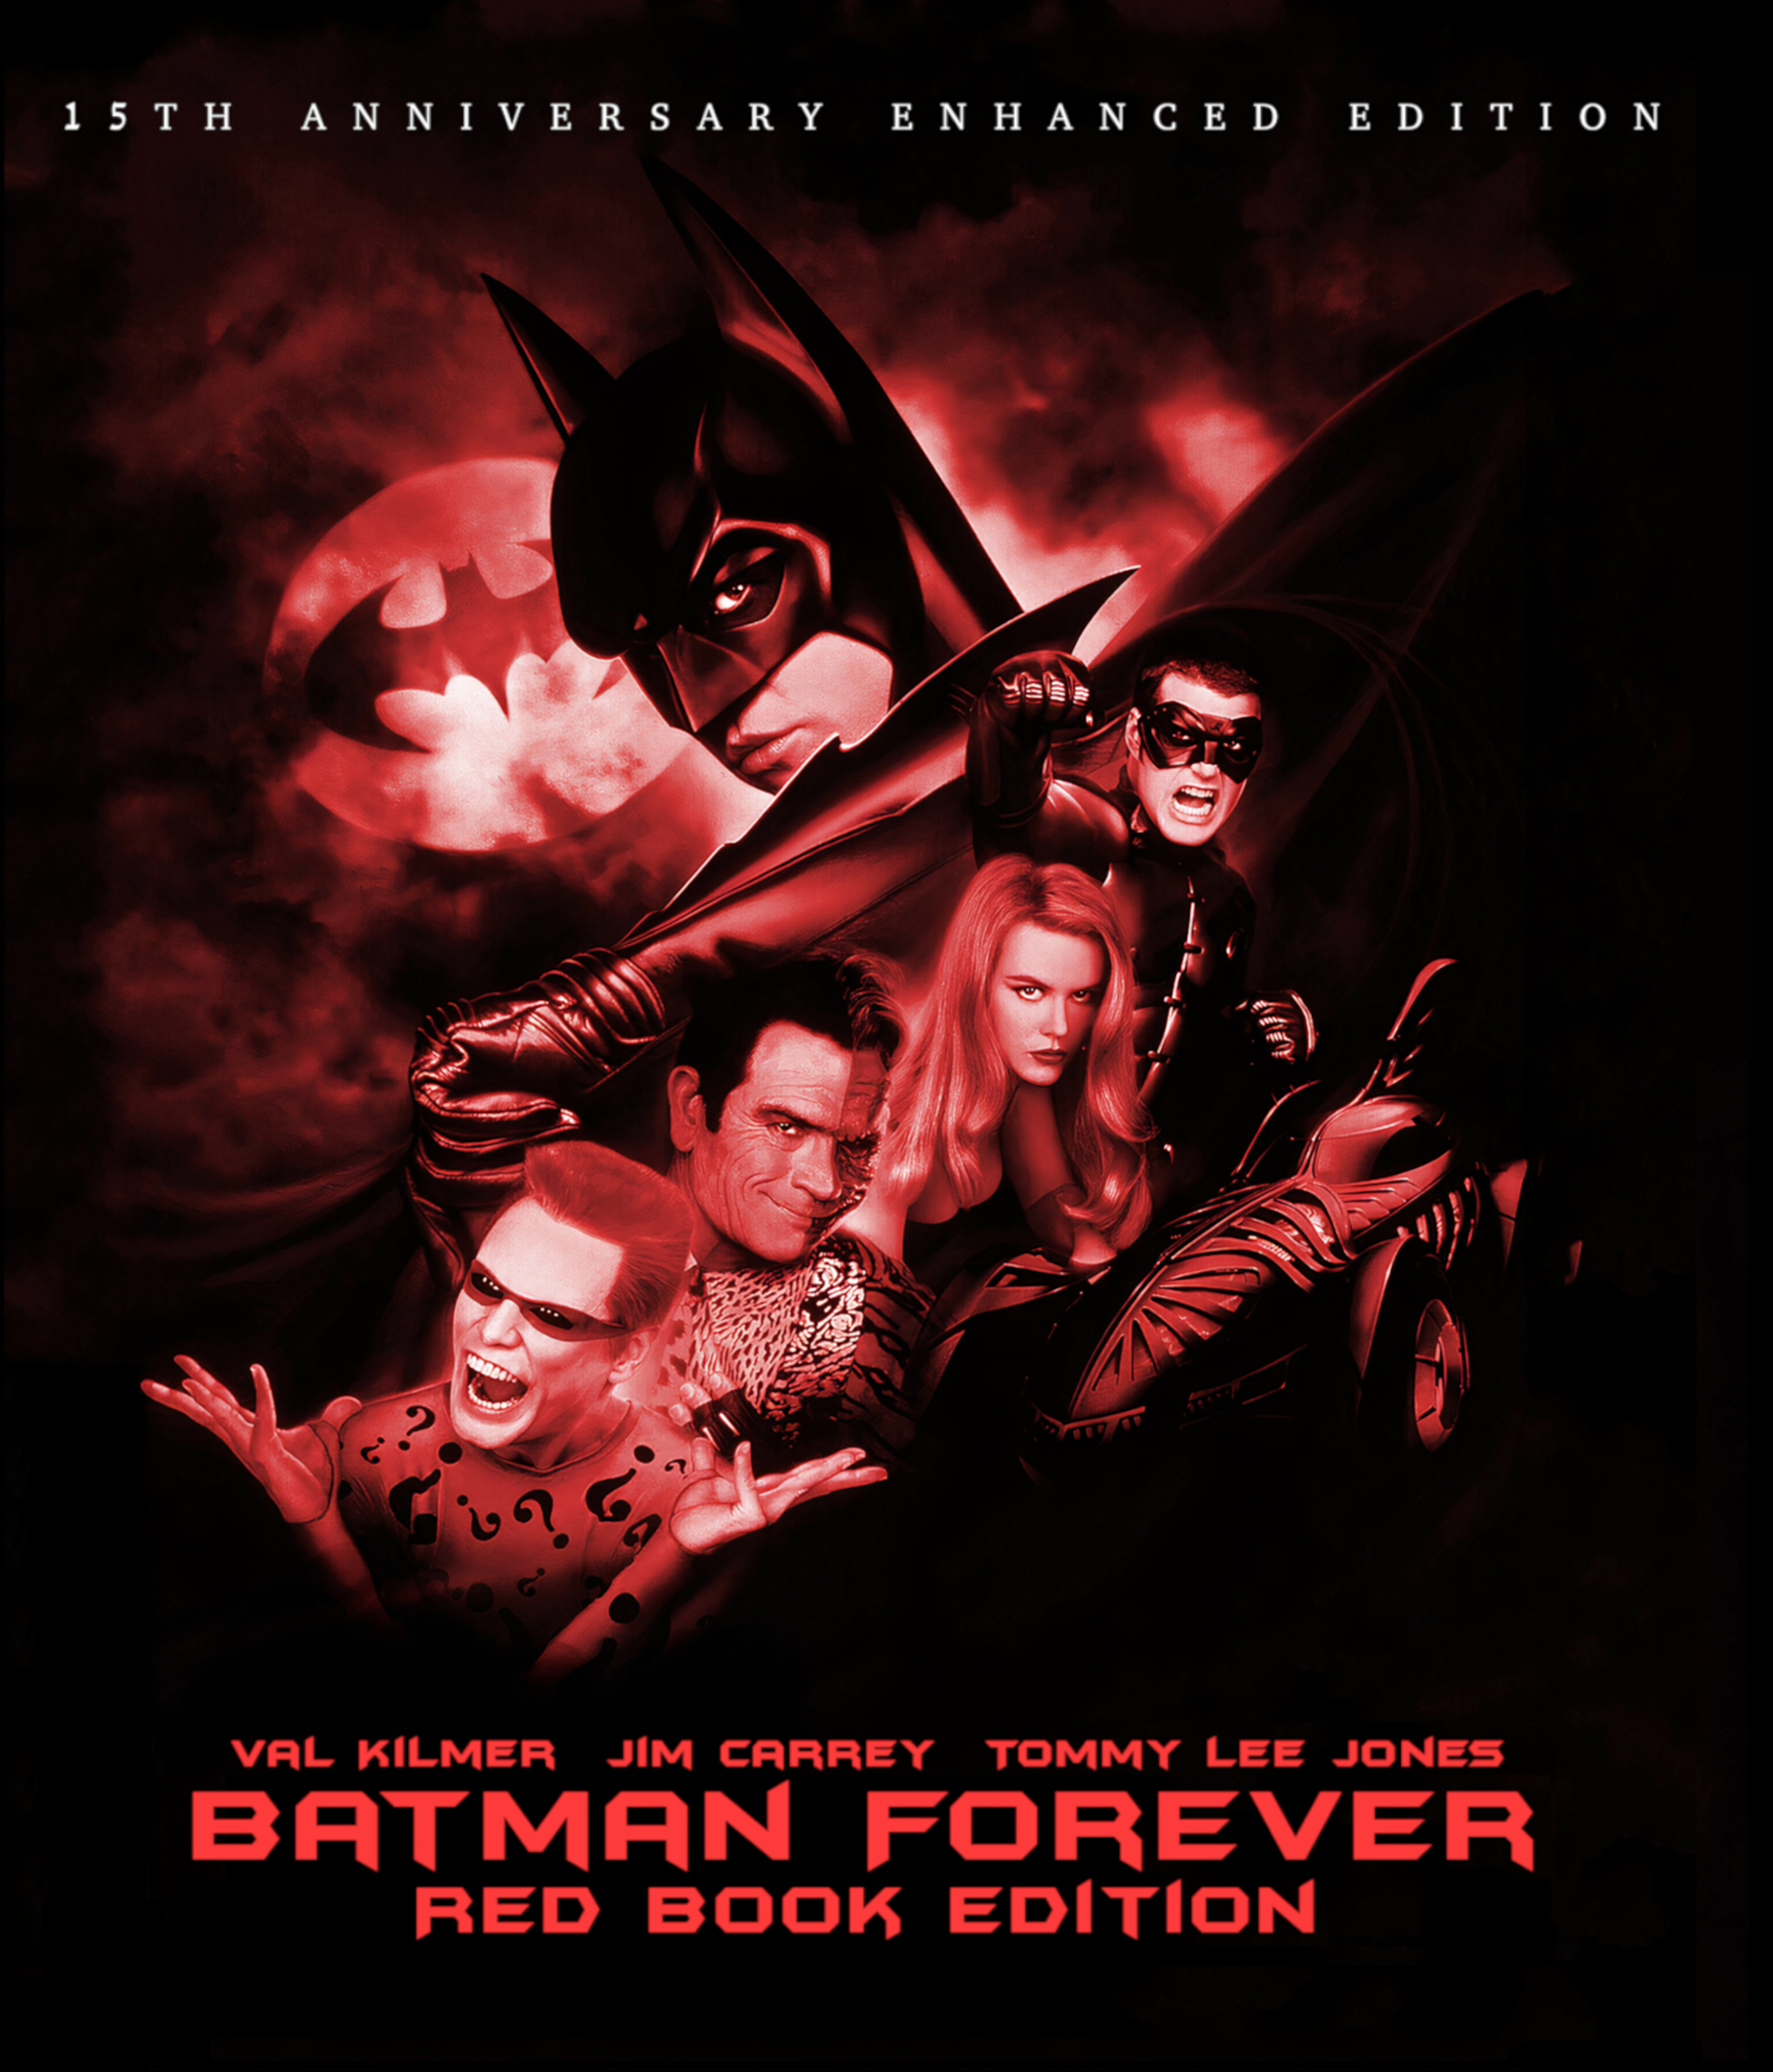 Batman Forever: Red Book Edition - The 15th Anniversary Revision - Bluray Art Cover